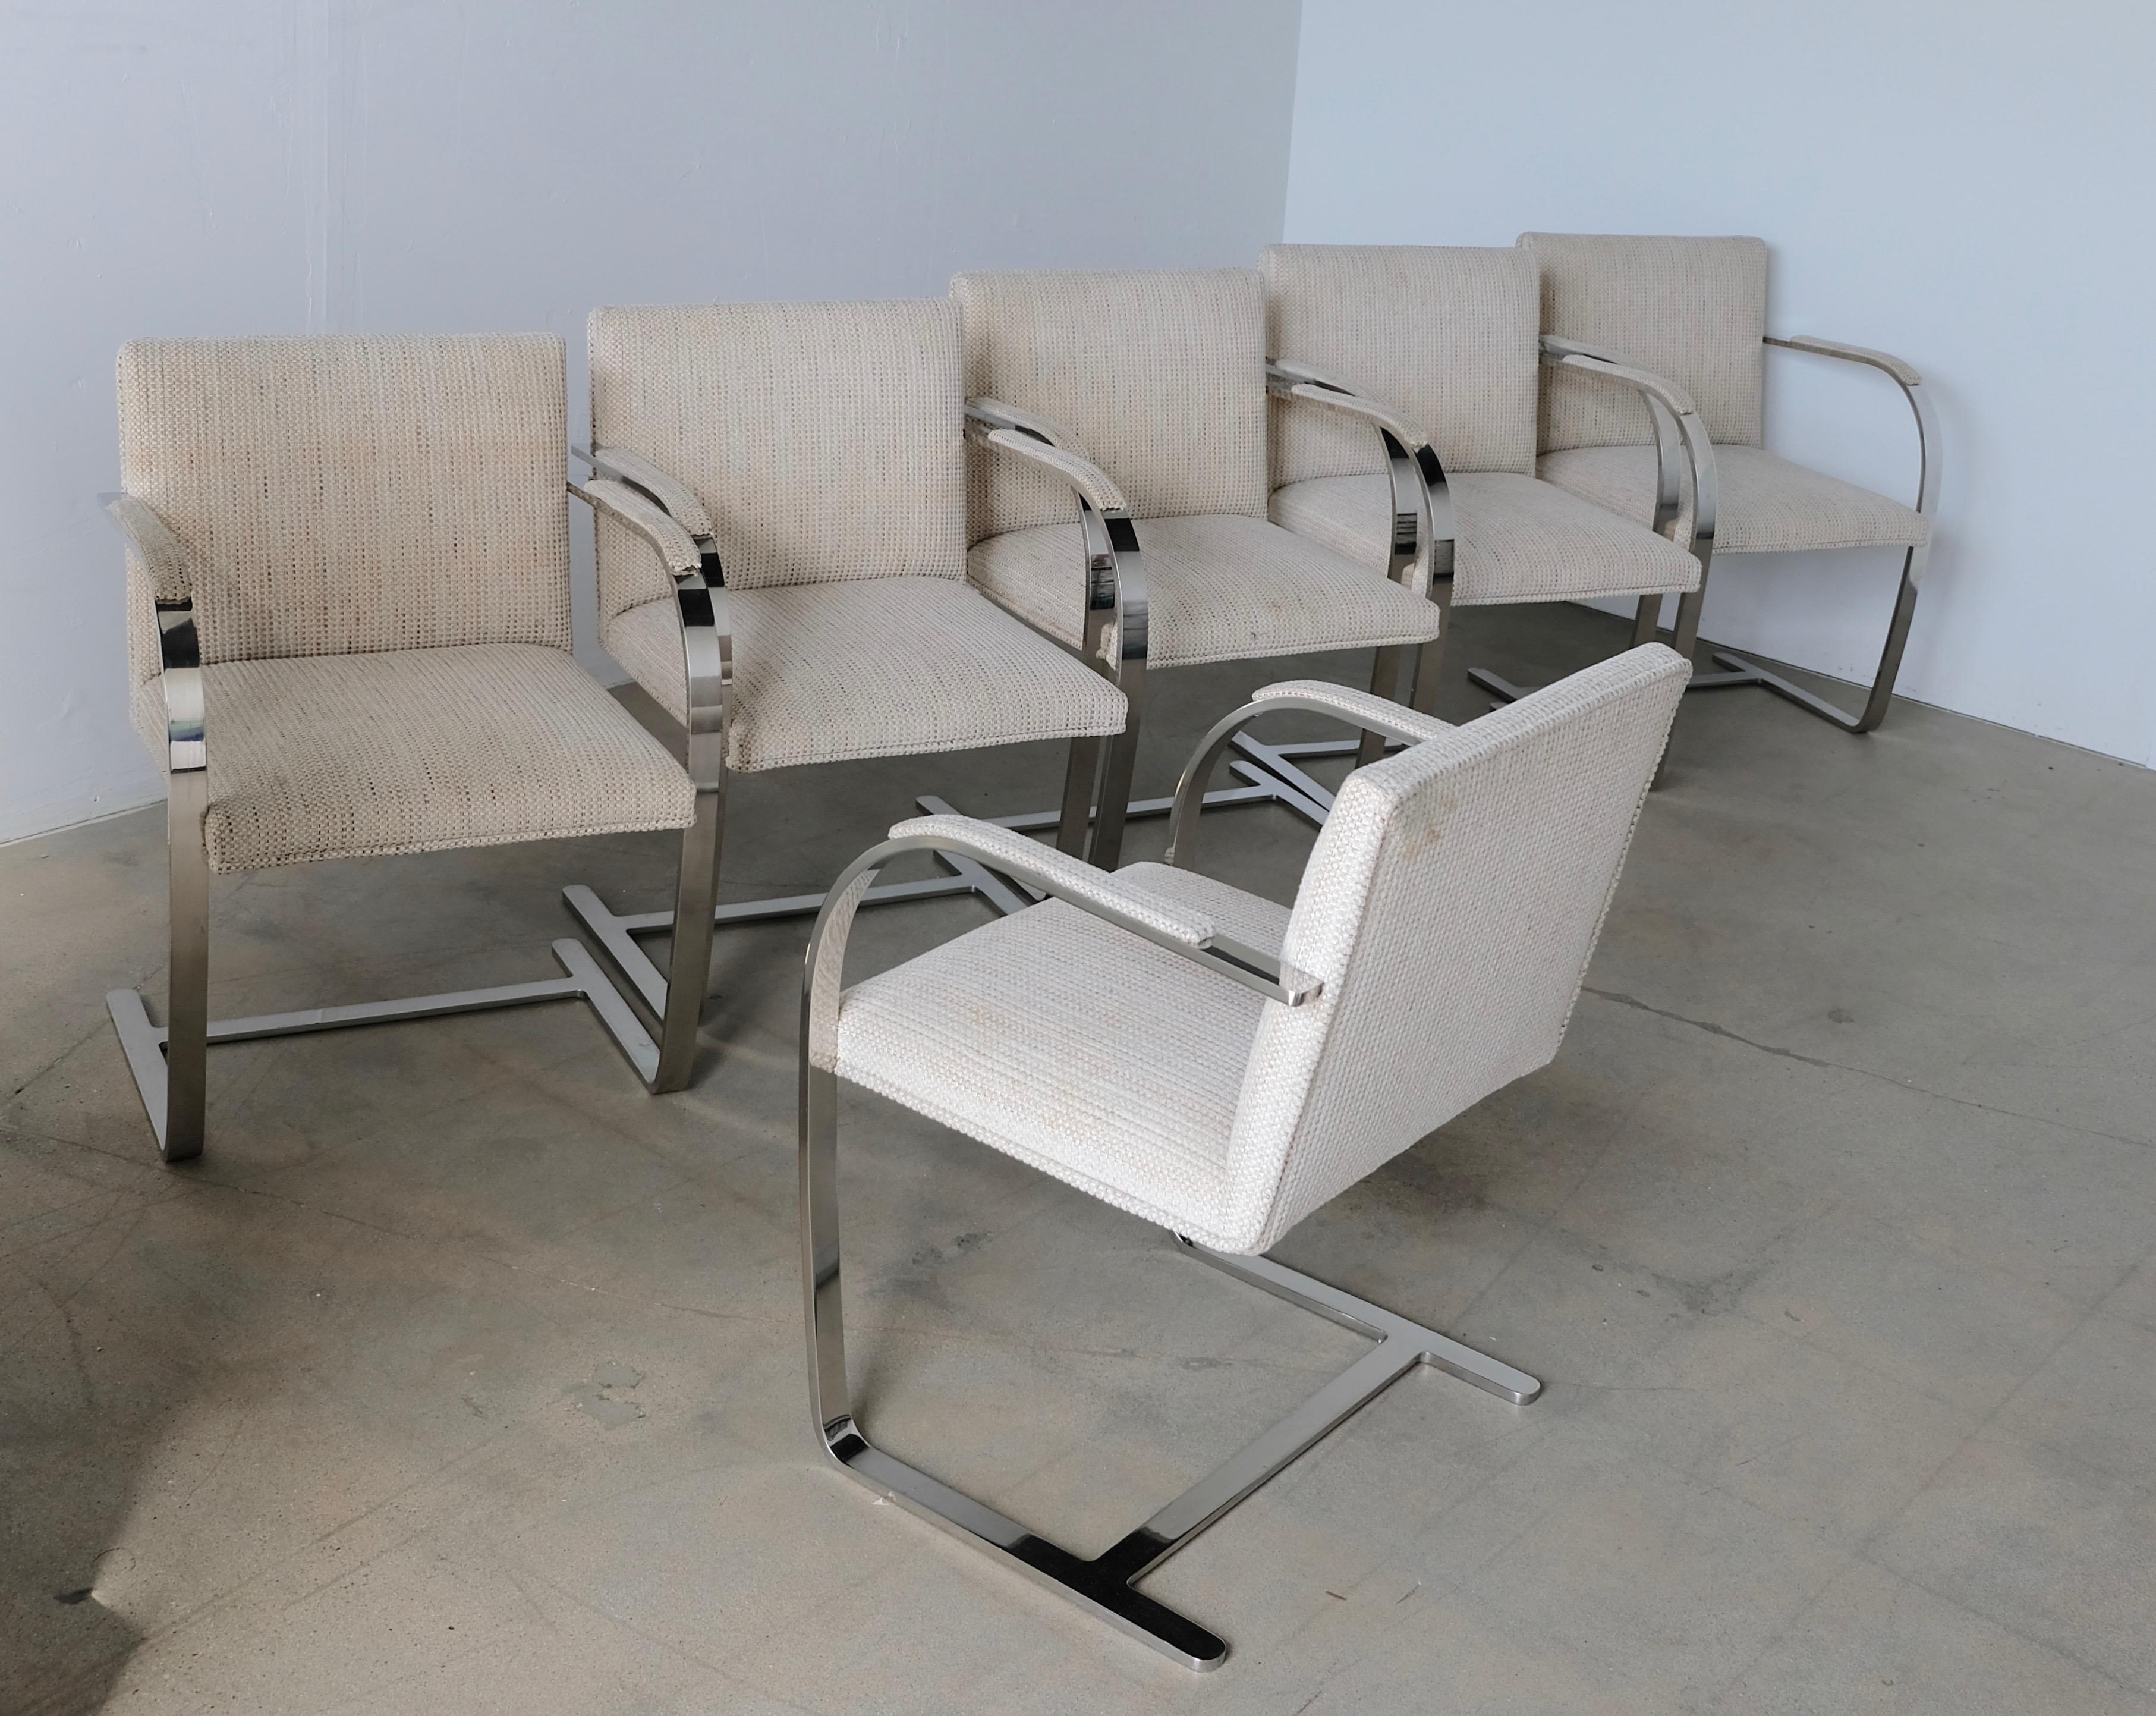 A nice vintage set of six flat bar Brno dining chairs designed by Mies van der Rohe for Knoll.
Priced to allow for new upholstery. The heavy steel frames are in good vintage condition with some wear mostly at the bases see last photos. Arm is